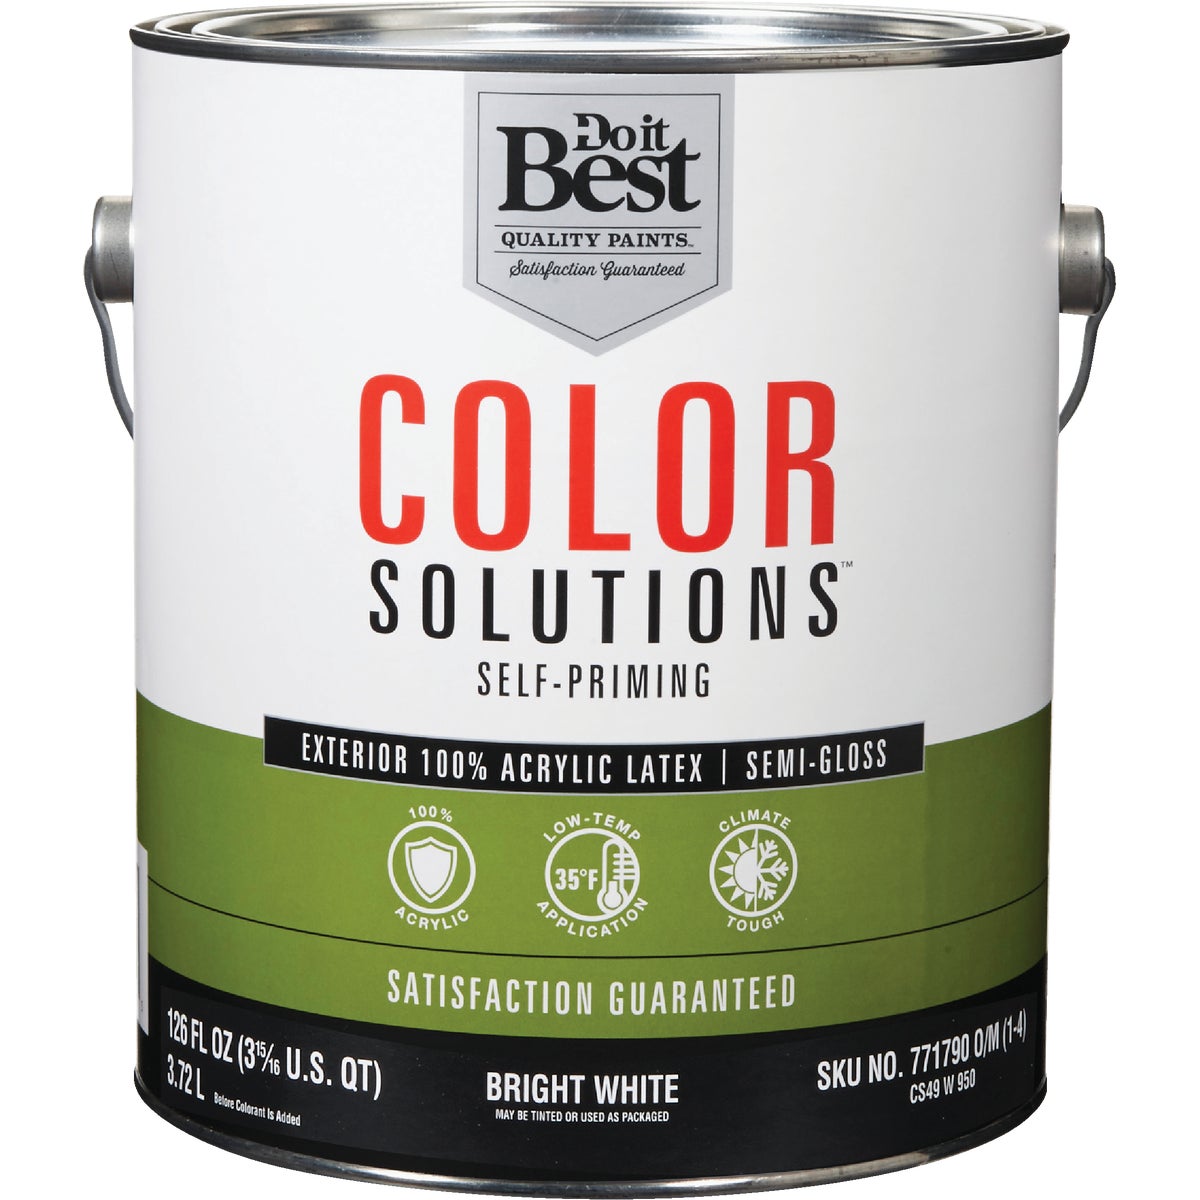 Do it Best Color Solutions 100% Acrylic Latex Self-Priming Semi-Gloss Exterior House Paint, Bright White, 1 Gal.